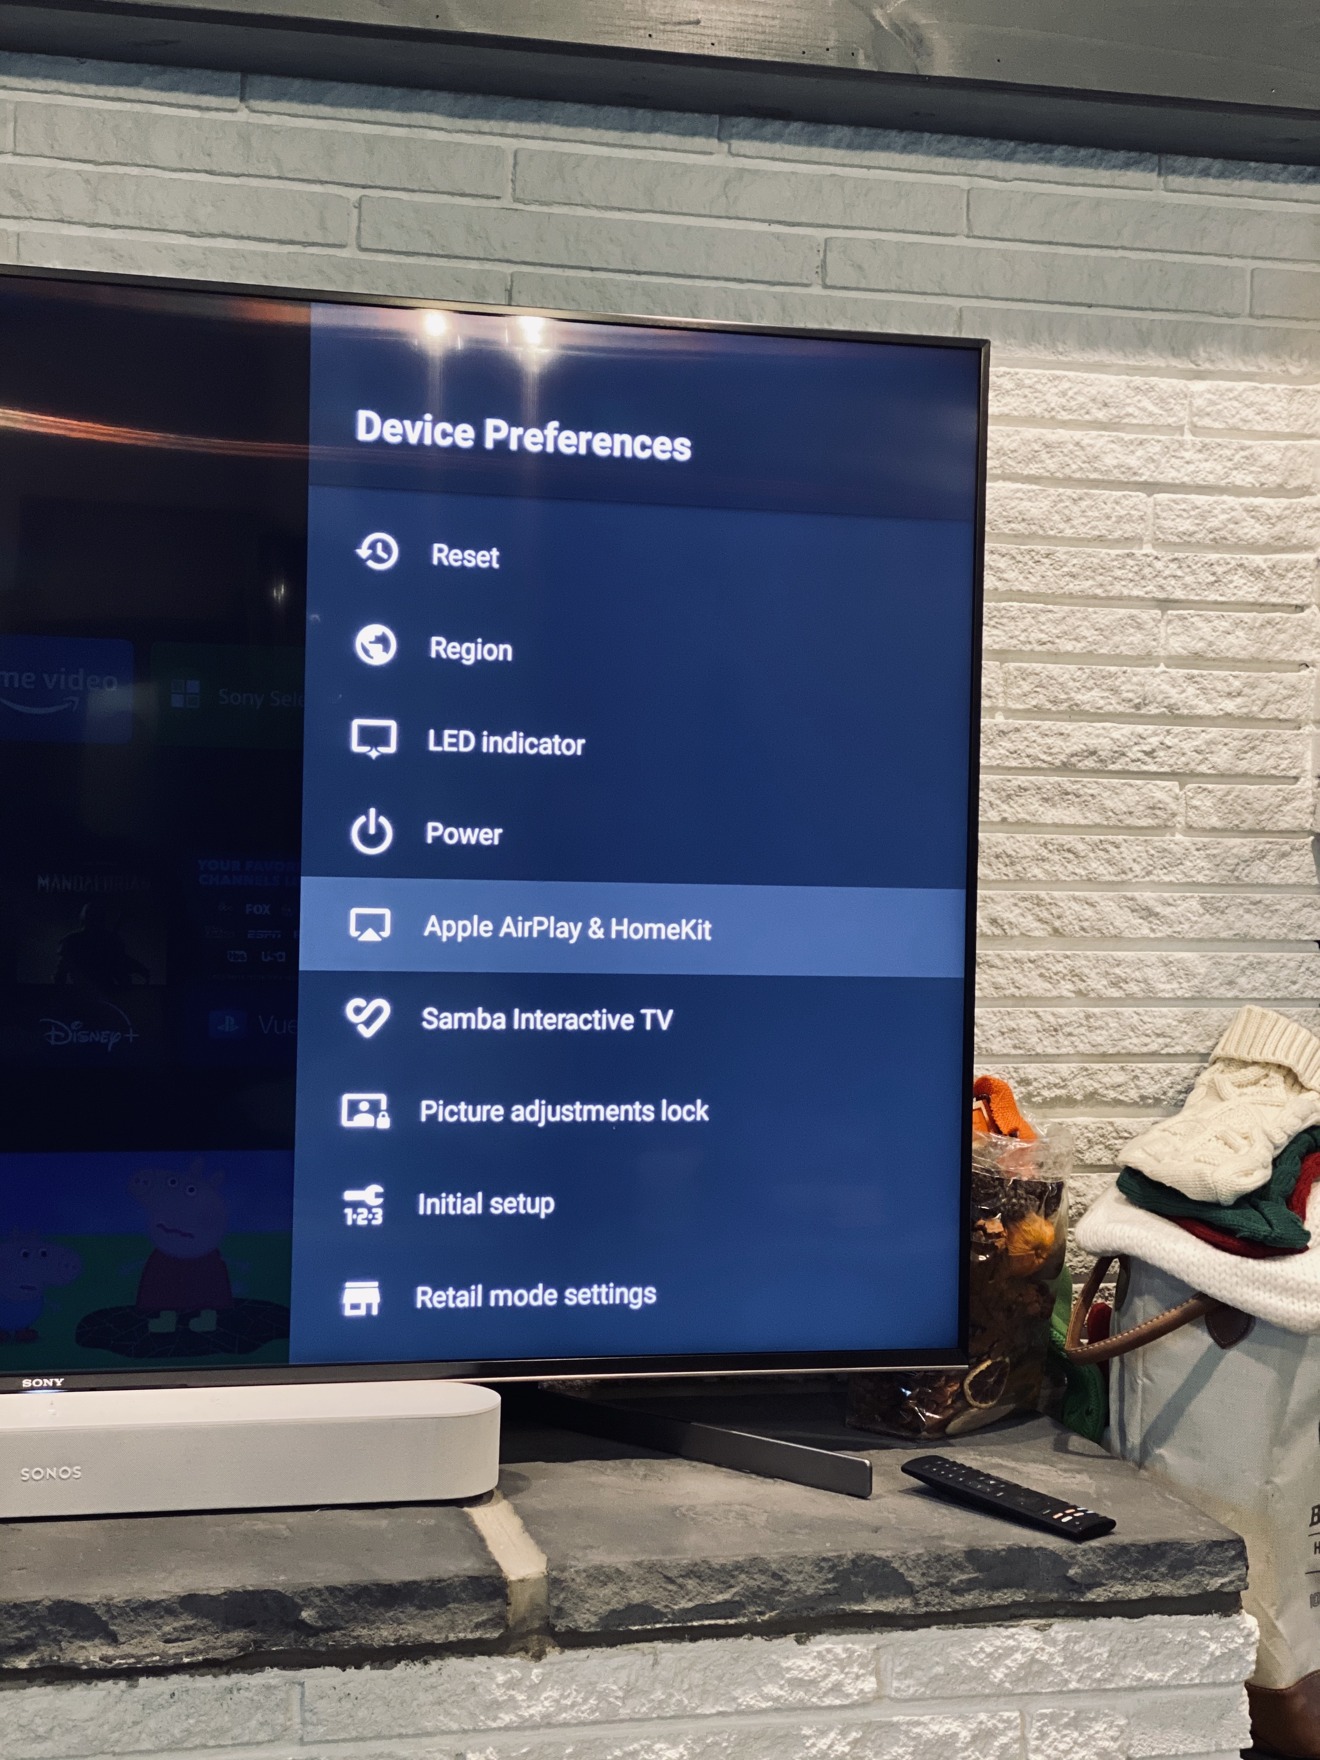 Hot And Airplay 2 On Sony Smart Tvs, Can Apple Screen Mirror On Sony Tv